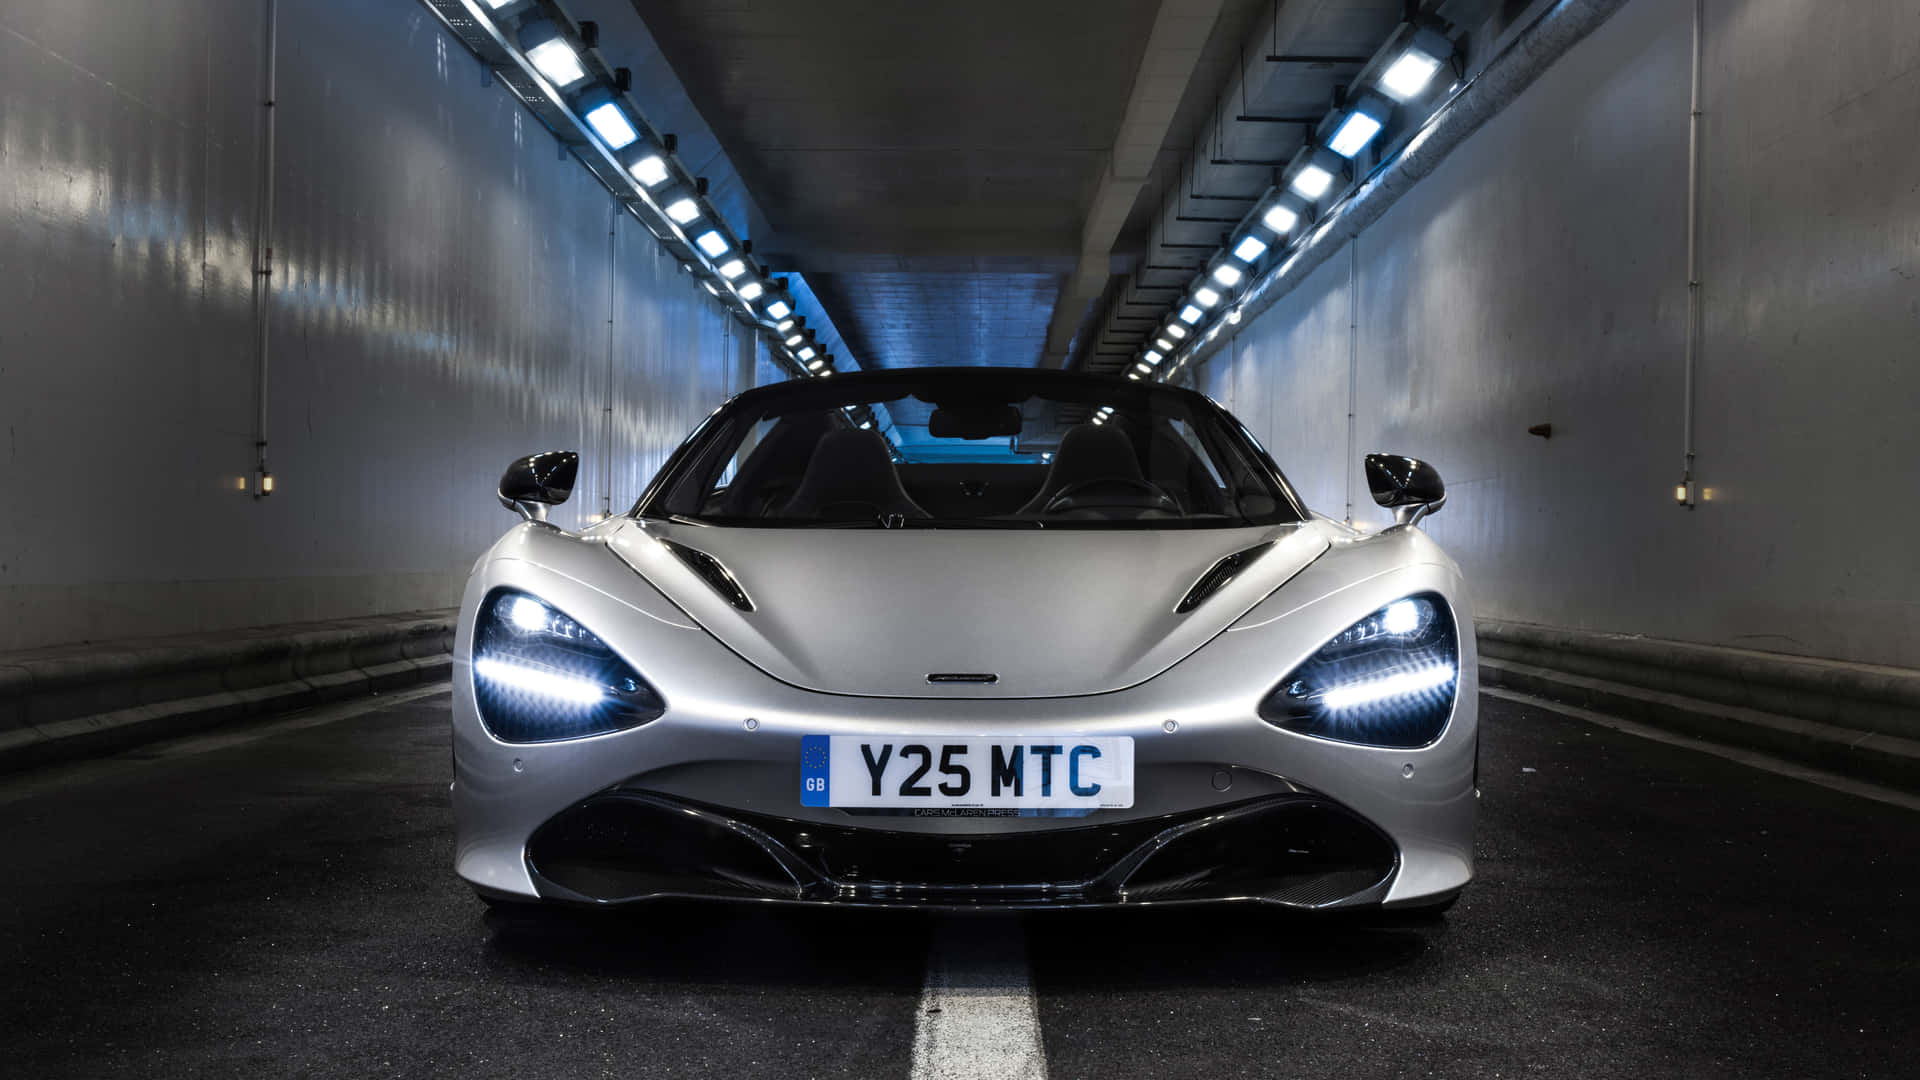 A Silver Sports Car Is Parked In A Tunnel